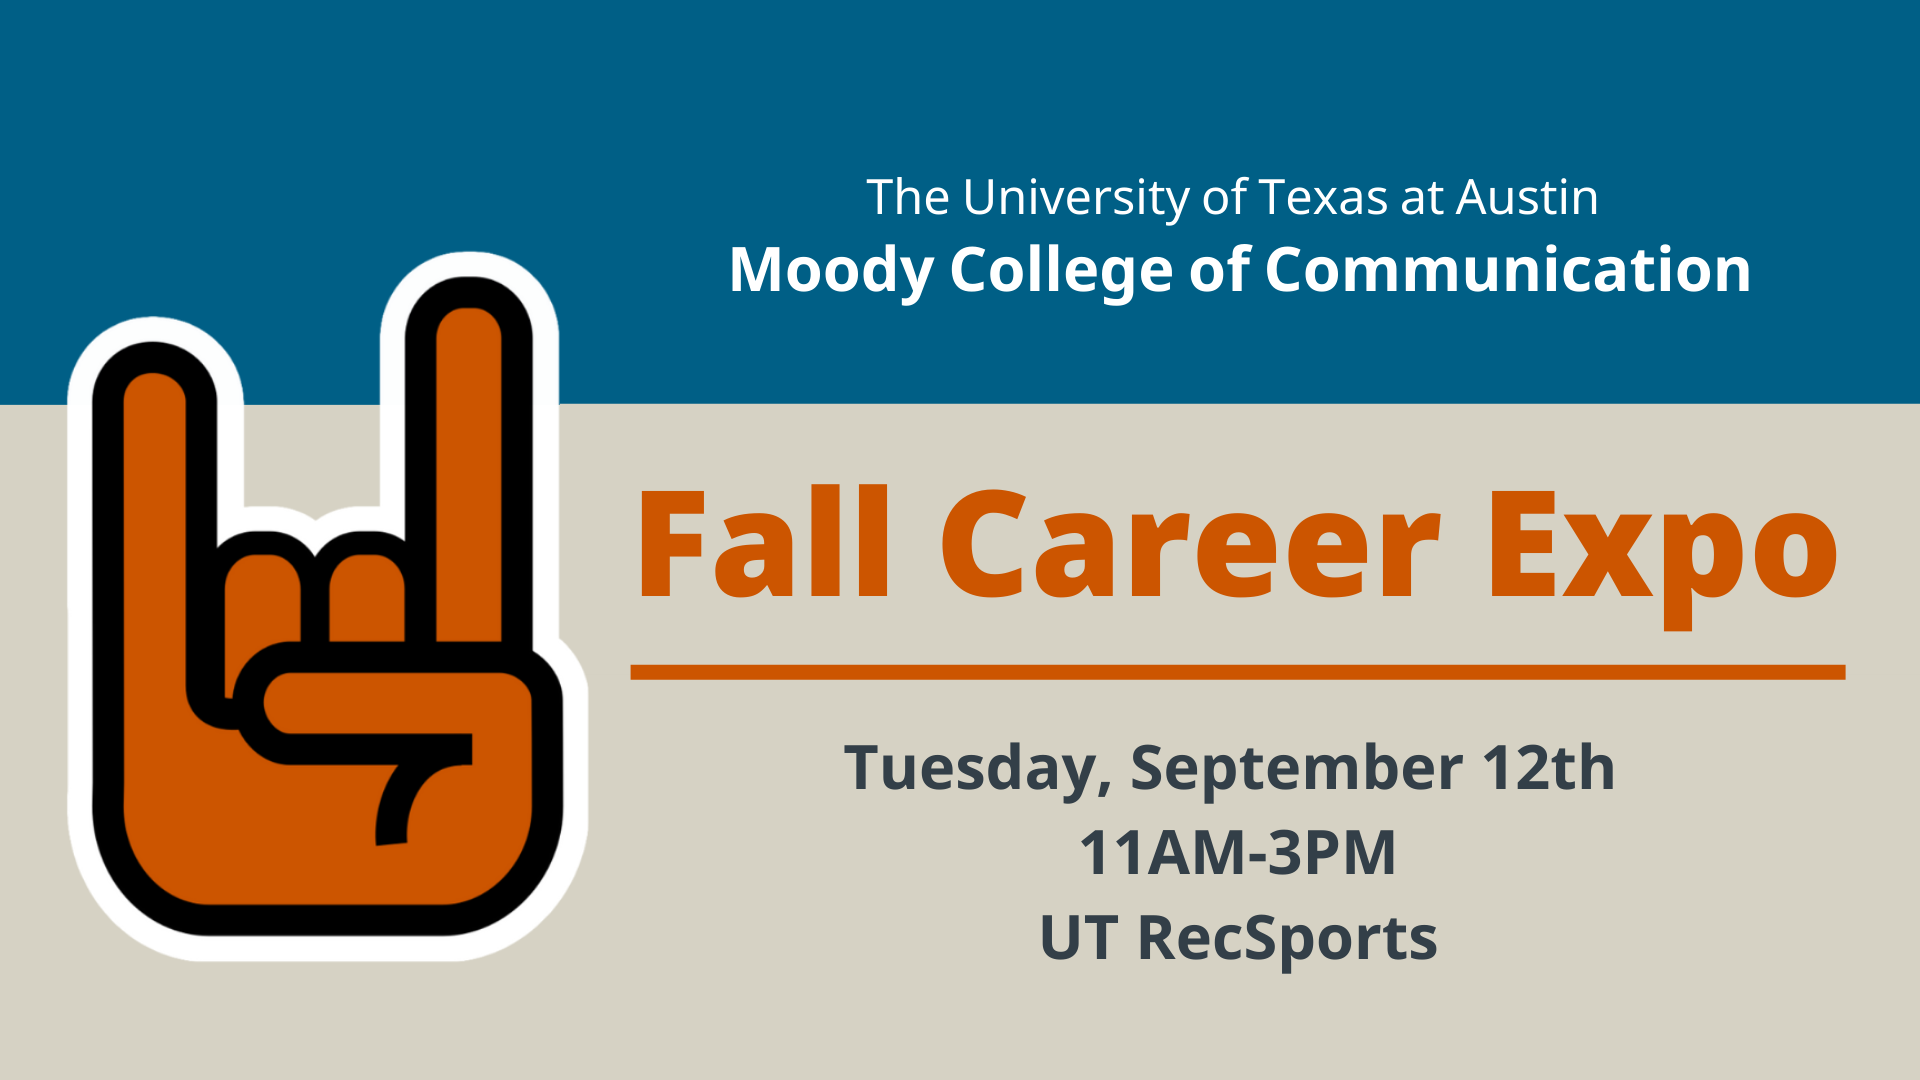 A graphic is featured with a "hook 'em horns" hand sign and text that says "Fall Career Expo"